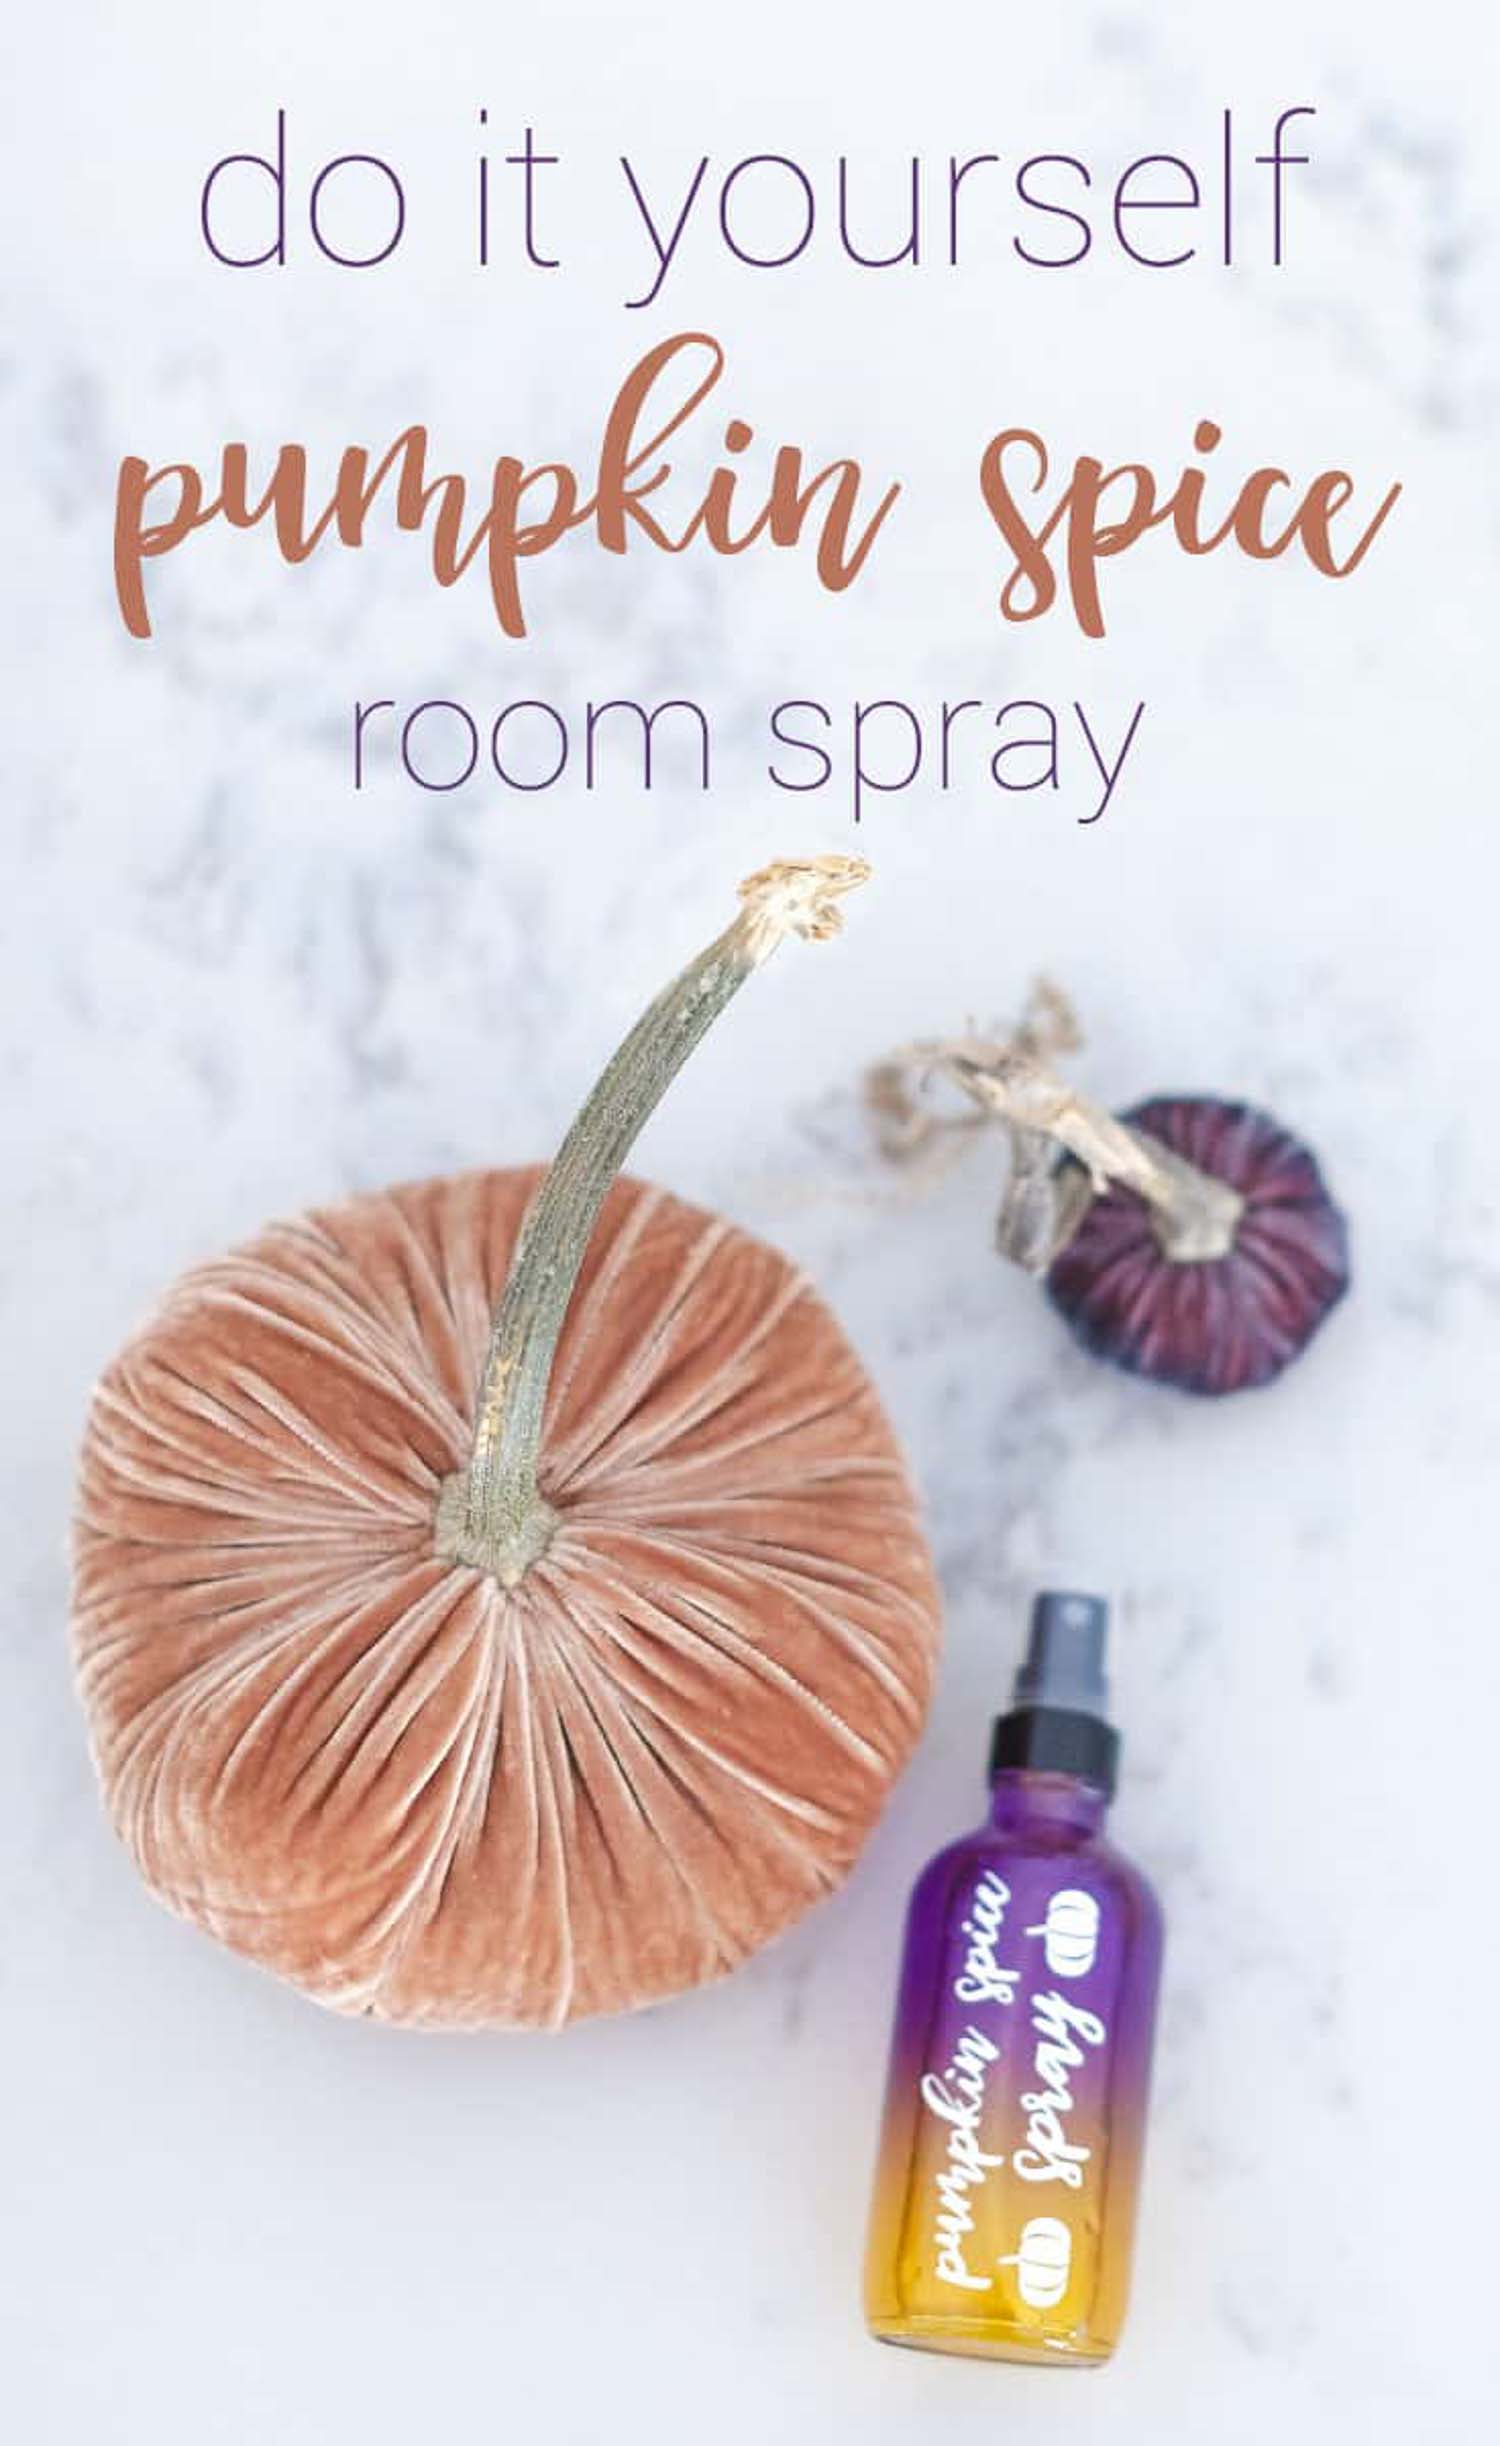 The words "do it yourself pumpkin spice room spray" at the top with 2 pumpkins-orange and purple- with a purple spray bottle at the bottom.